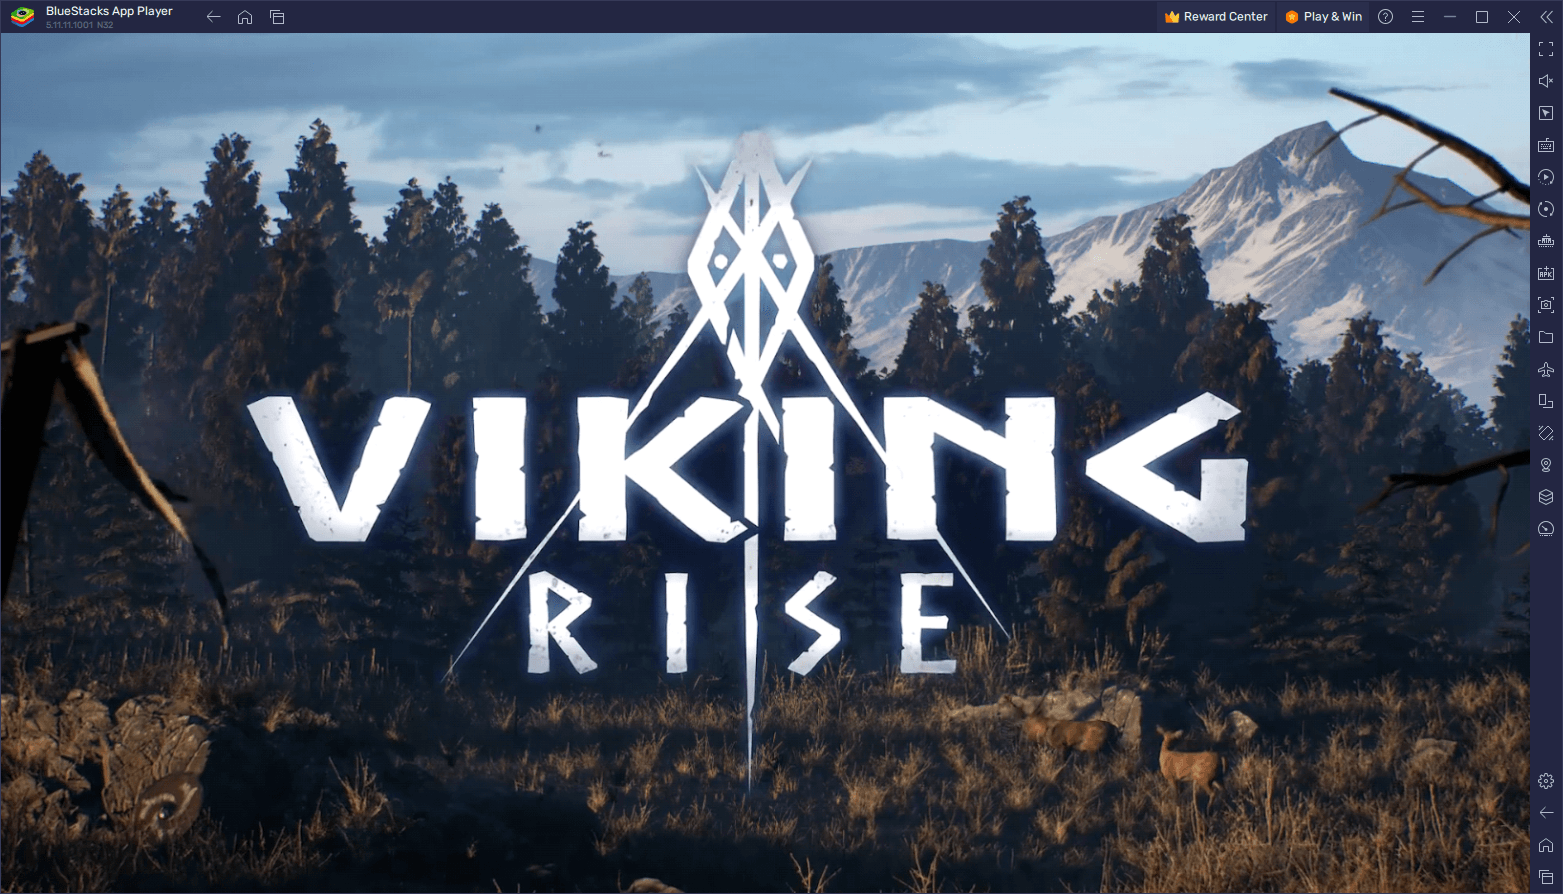 Viking Rise Reroll Guide - How to Obtain the Best Characters From Early On